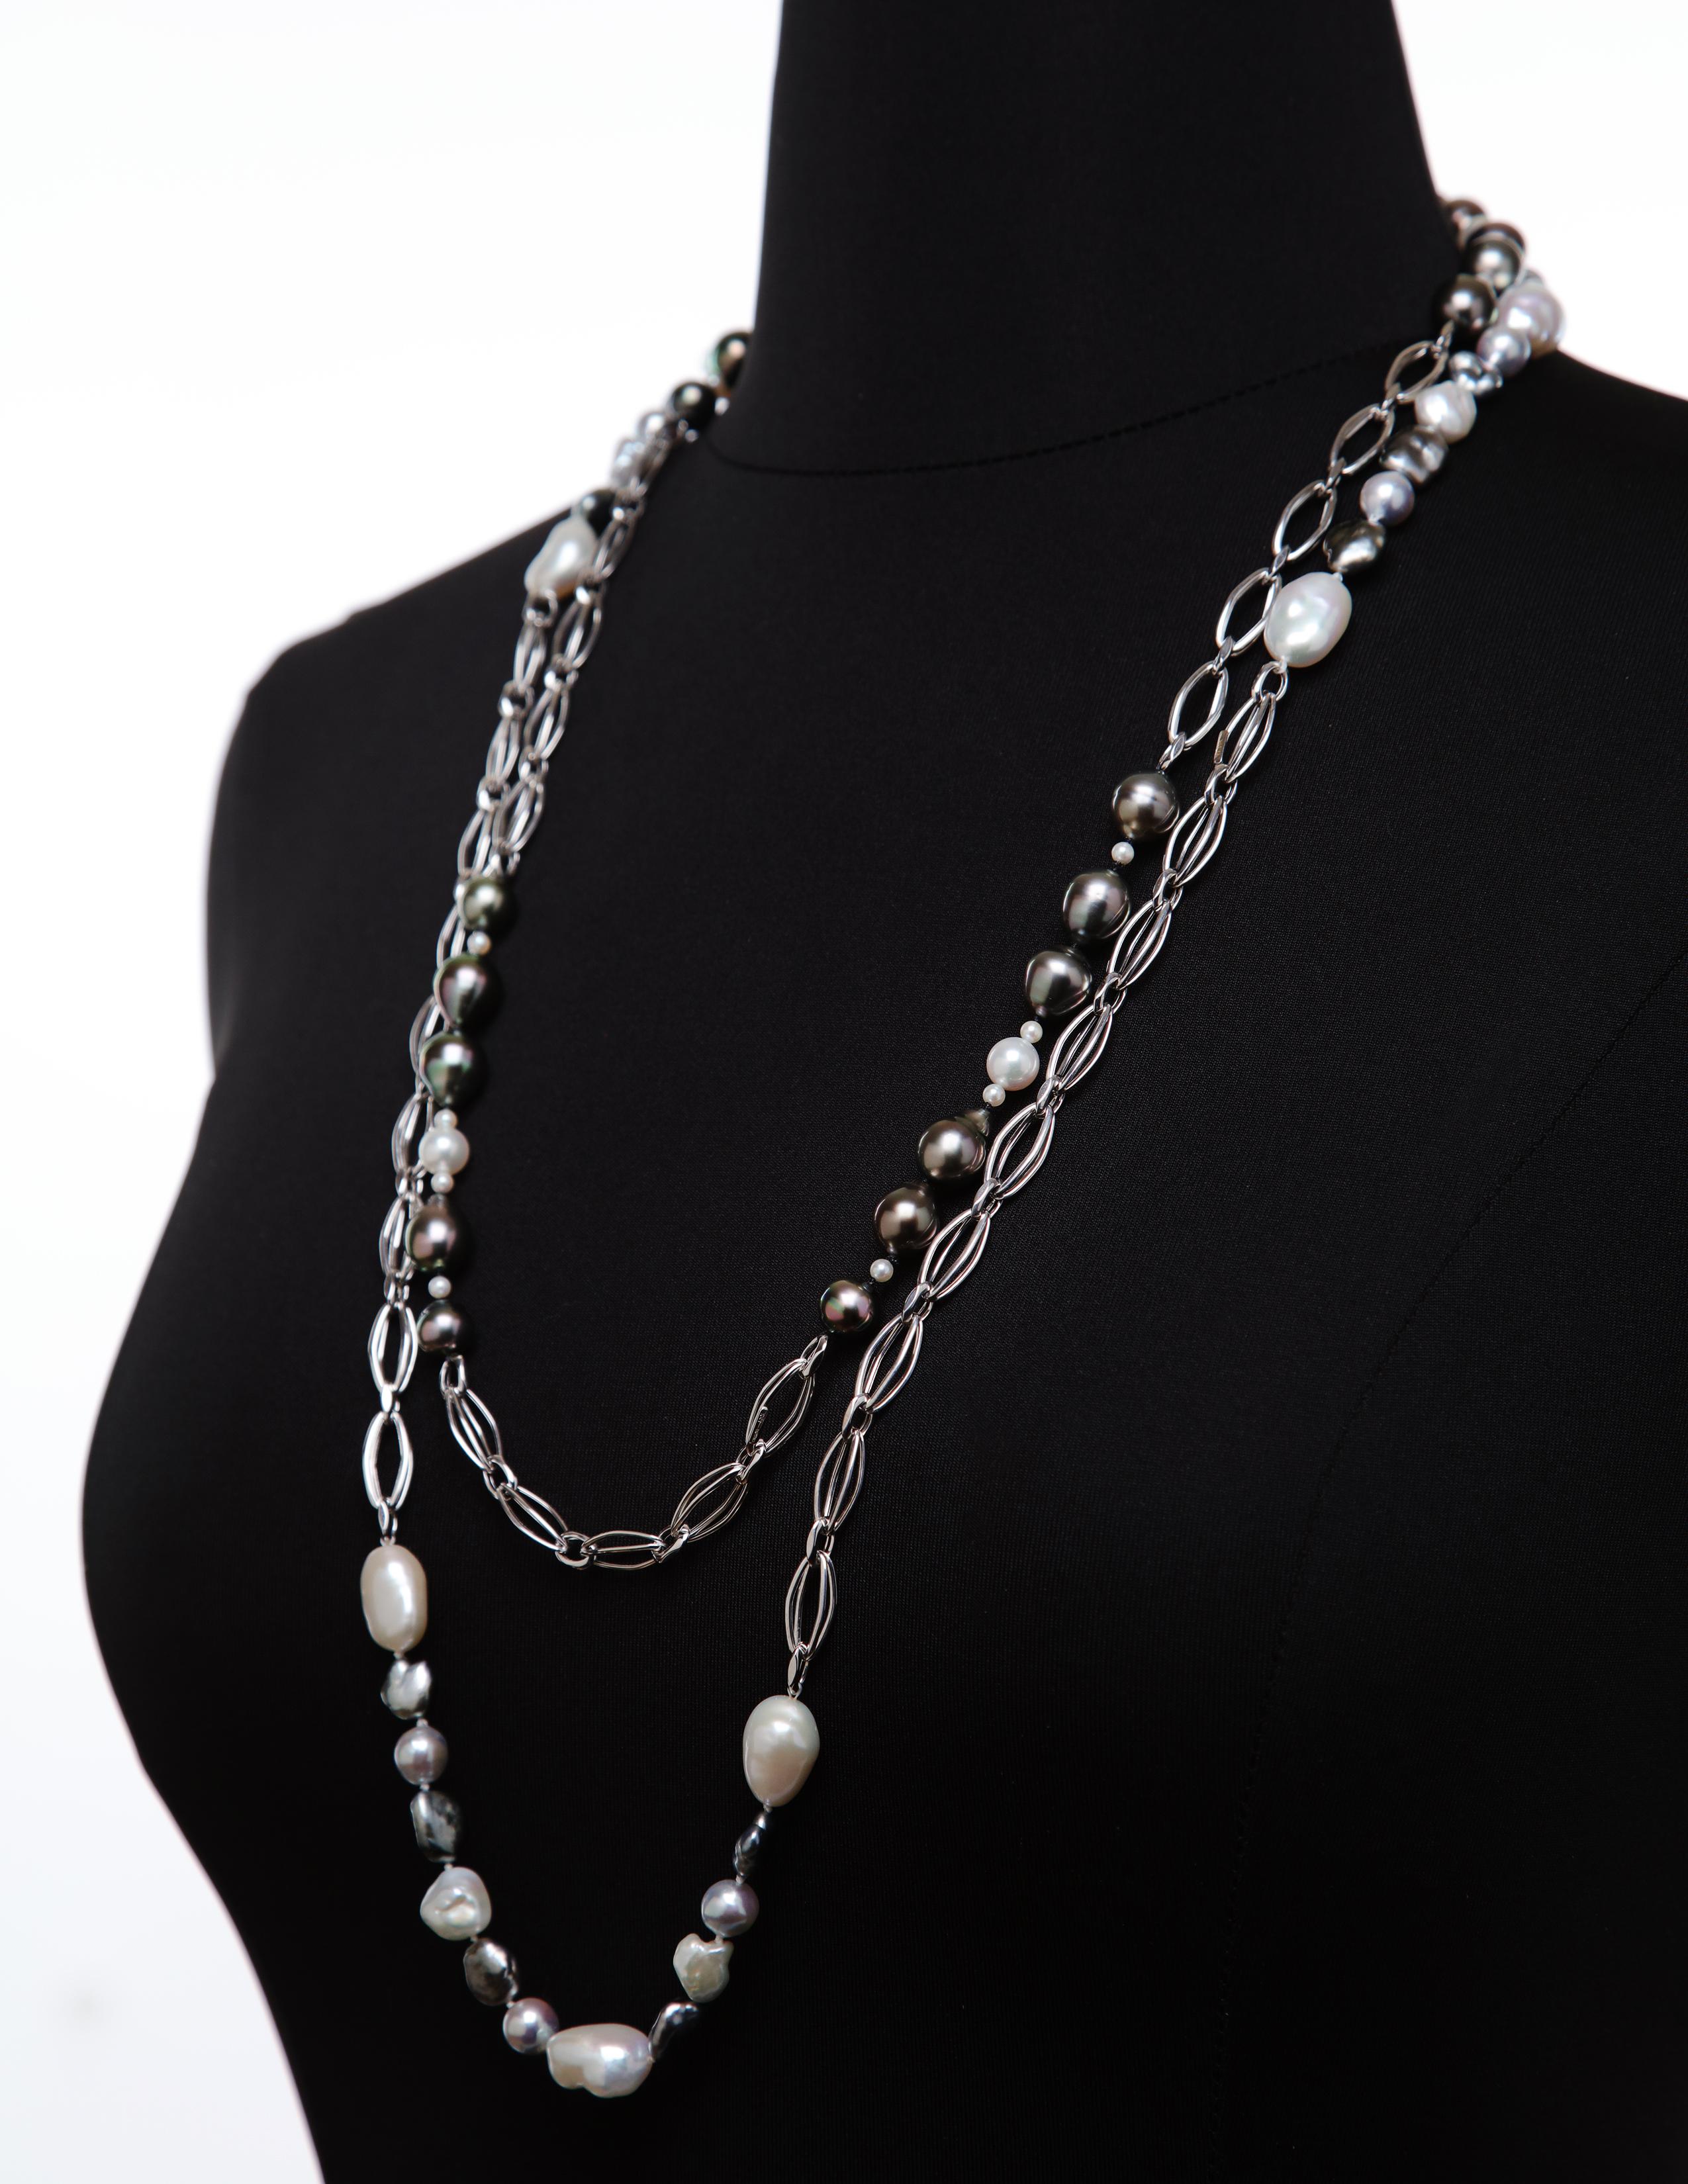 Bead Akoya, Keshi, and South Sea Pearls on a White Gold Chain For Sale